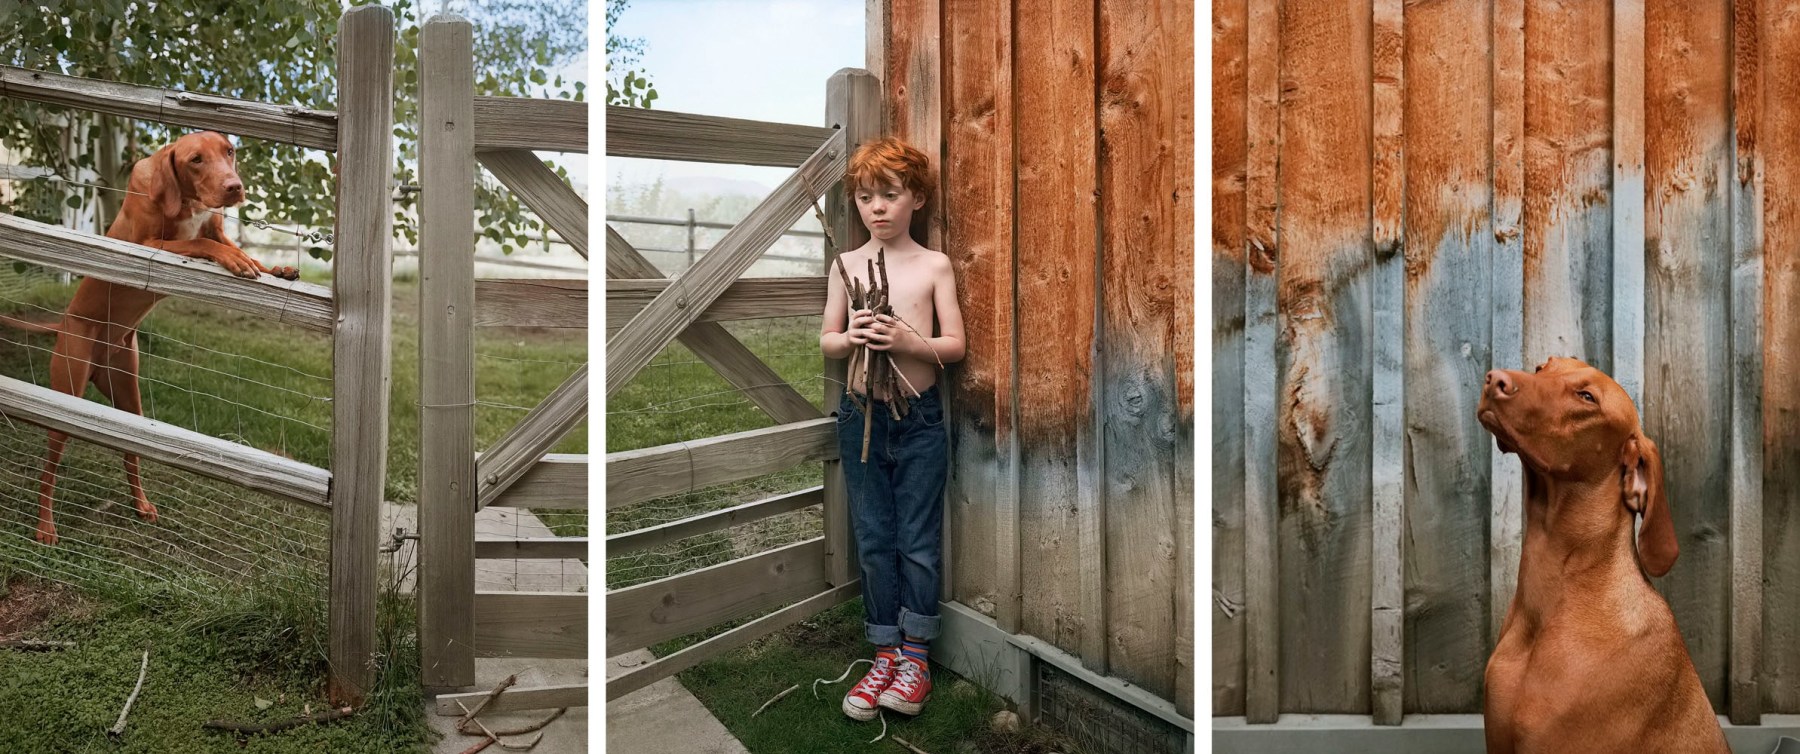 Still with Sticks, 2013. Three-panel archival pigment print, available as&nbsp;24 x 60 or 40 x 90 inches.&nbsp;